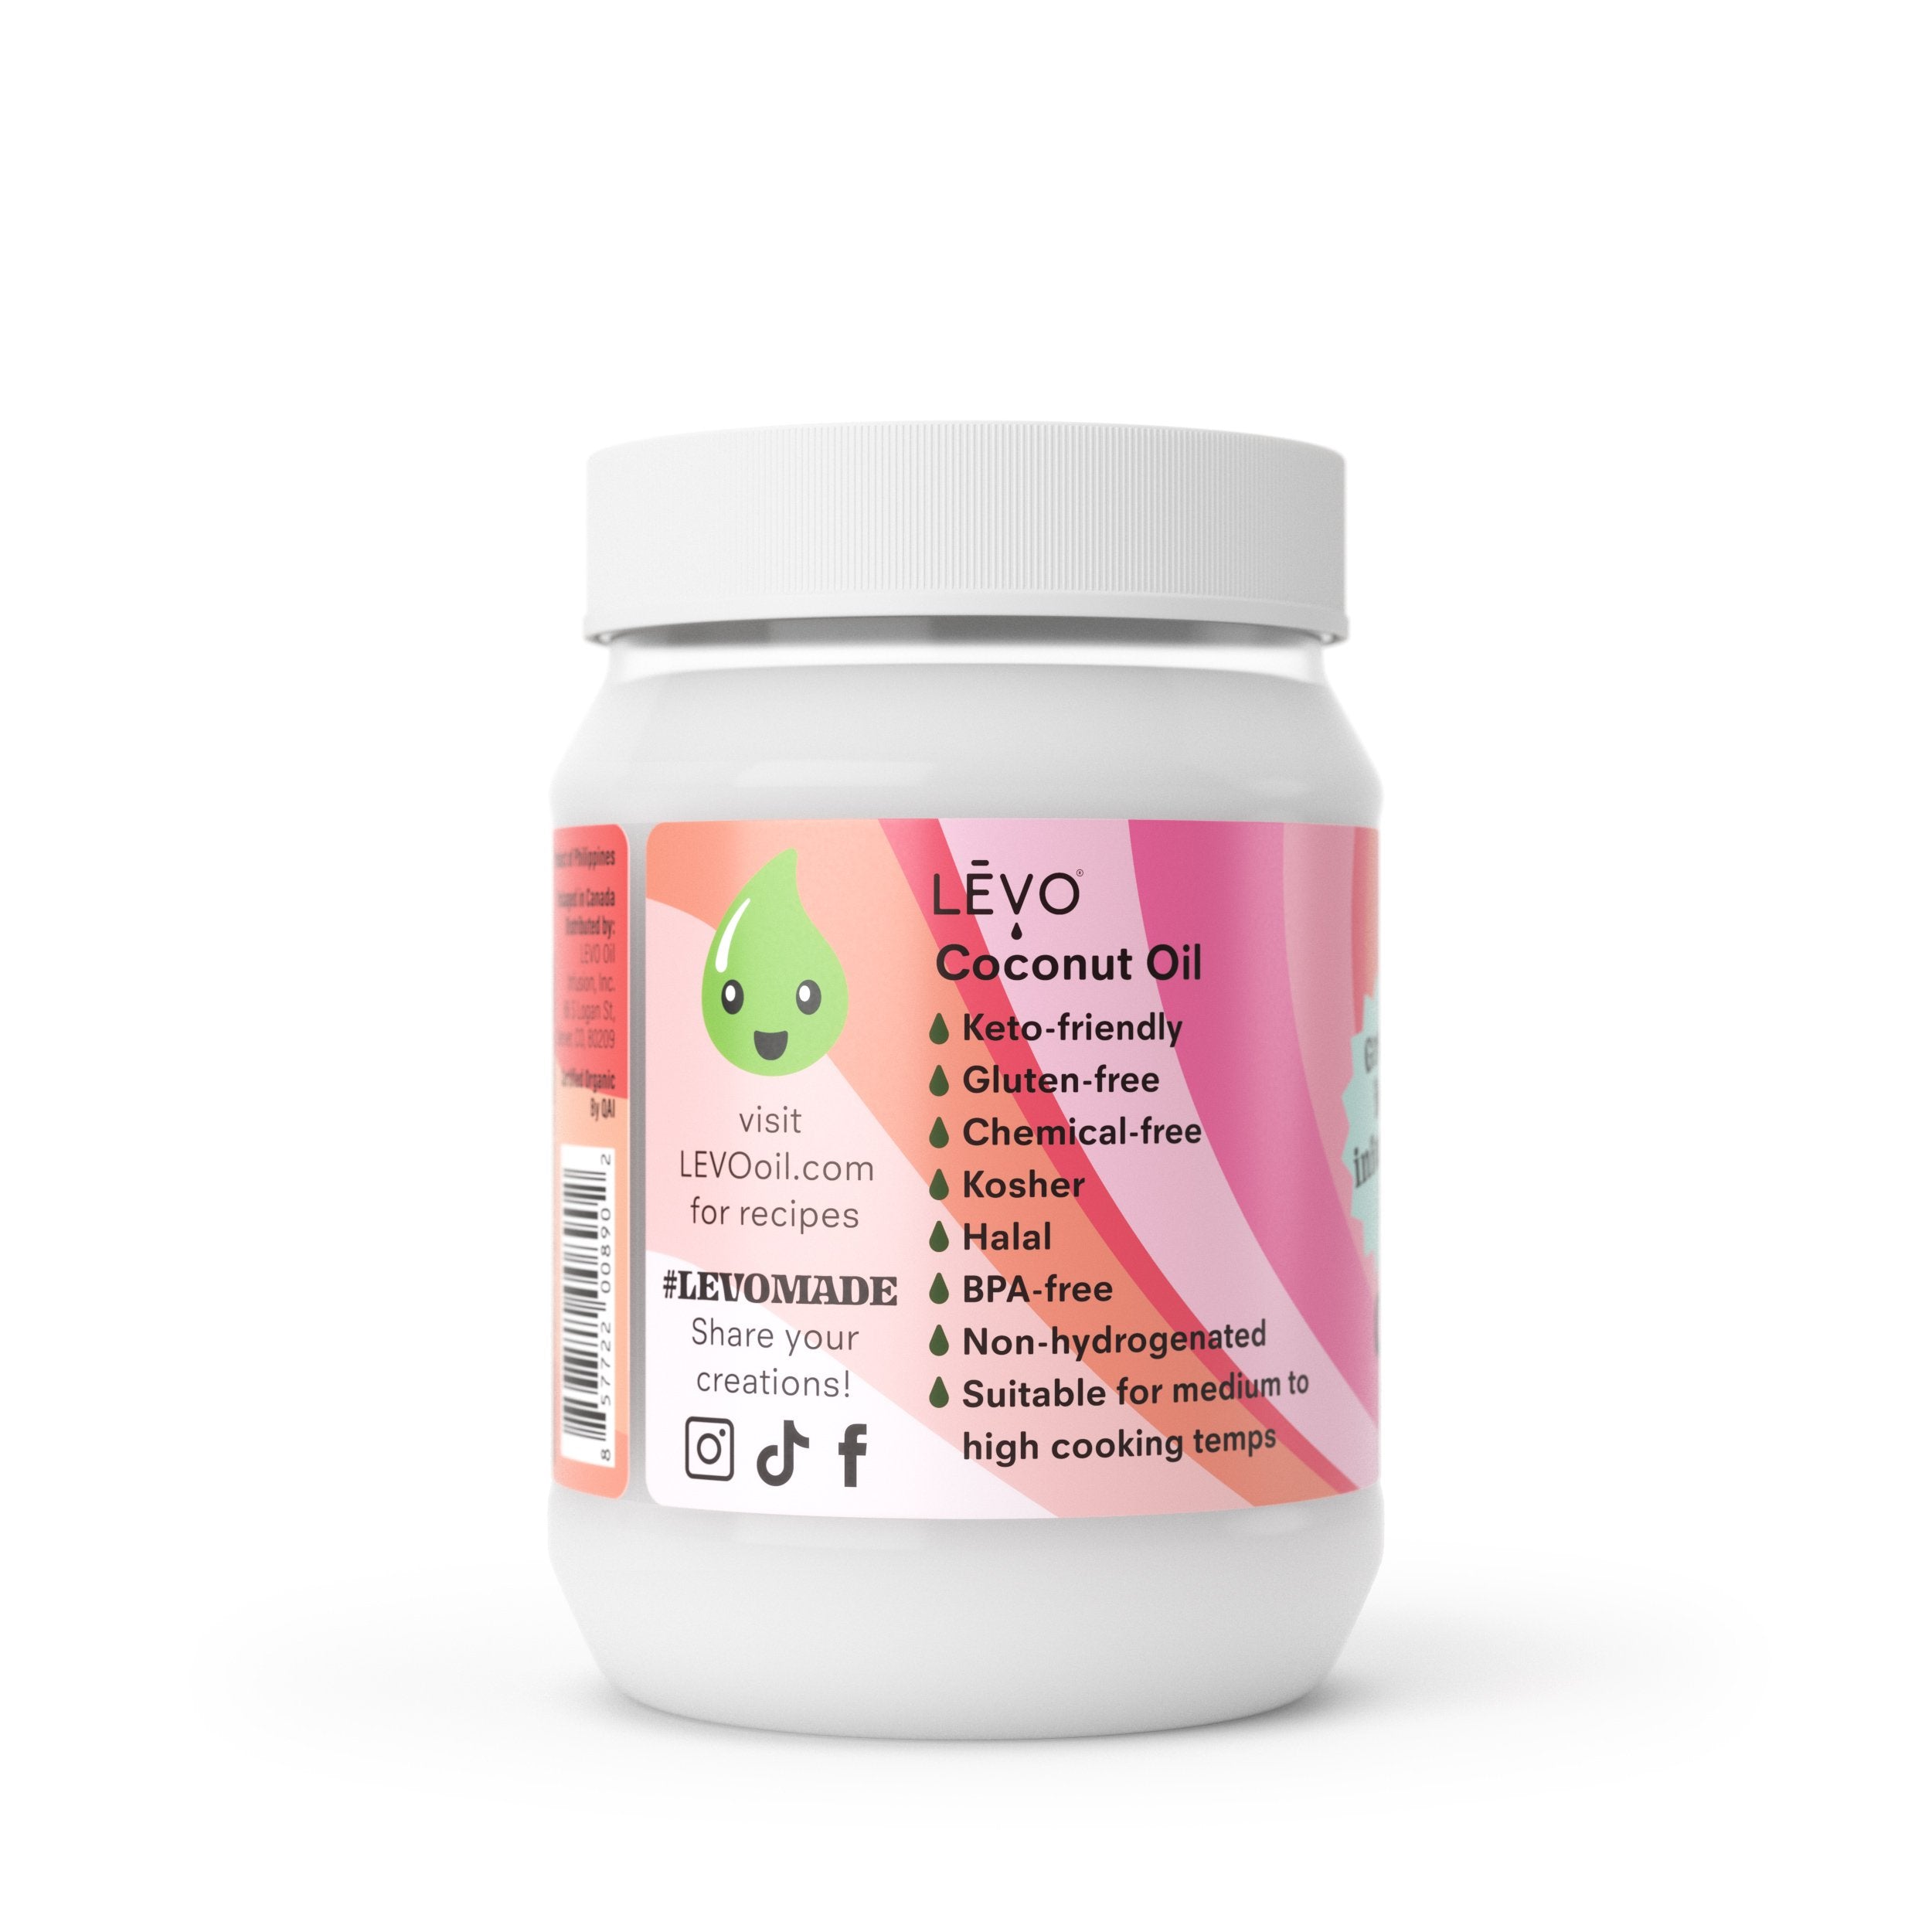 LEVO Coconut Oil is keto-friendly, gluten-free, chemical-free, kosher, halal, BPA-free, non-hydrogenated, and good for cooking at medium to high temperatures.